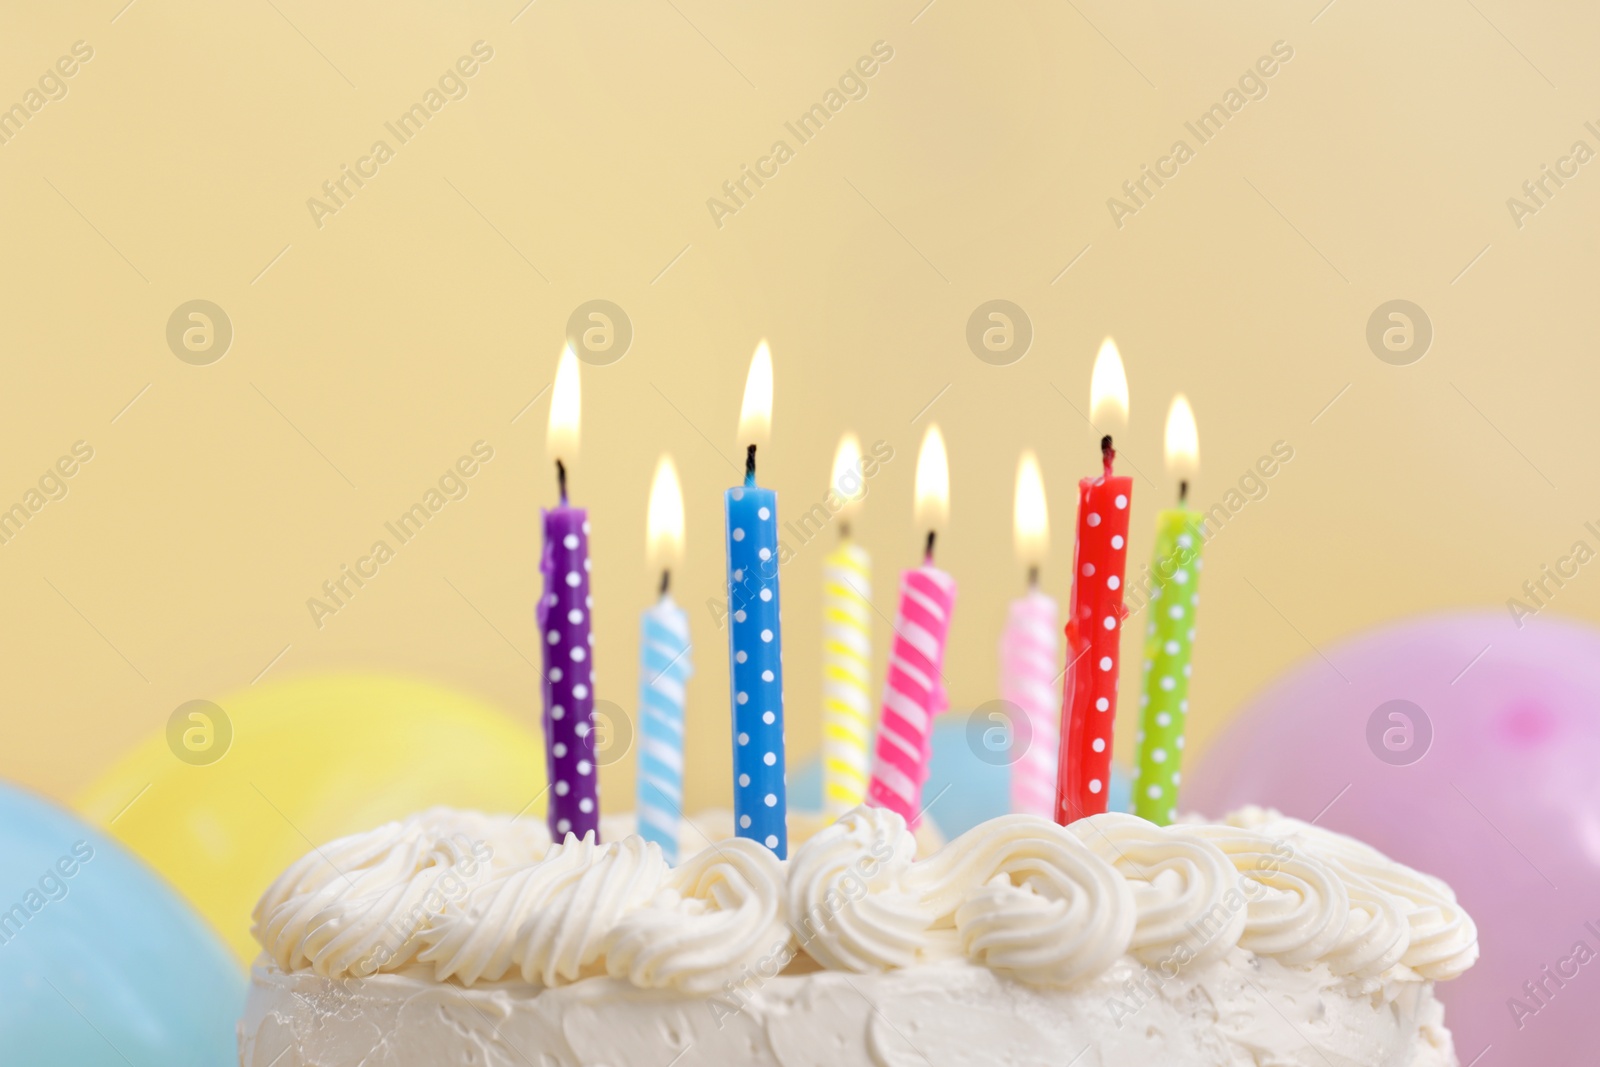 Photo of Delicious cake with burning candles and festive decor on yellow background, closeup